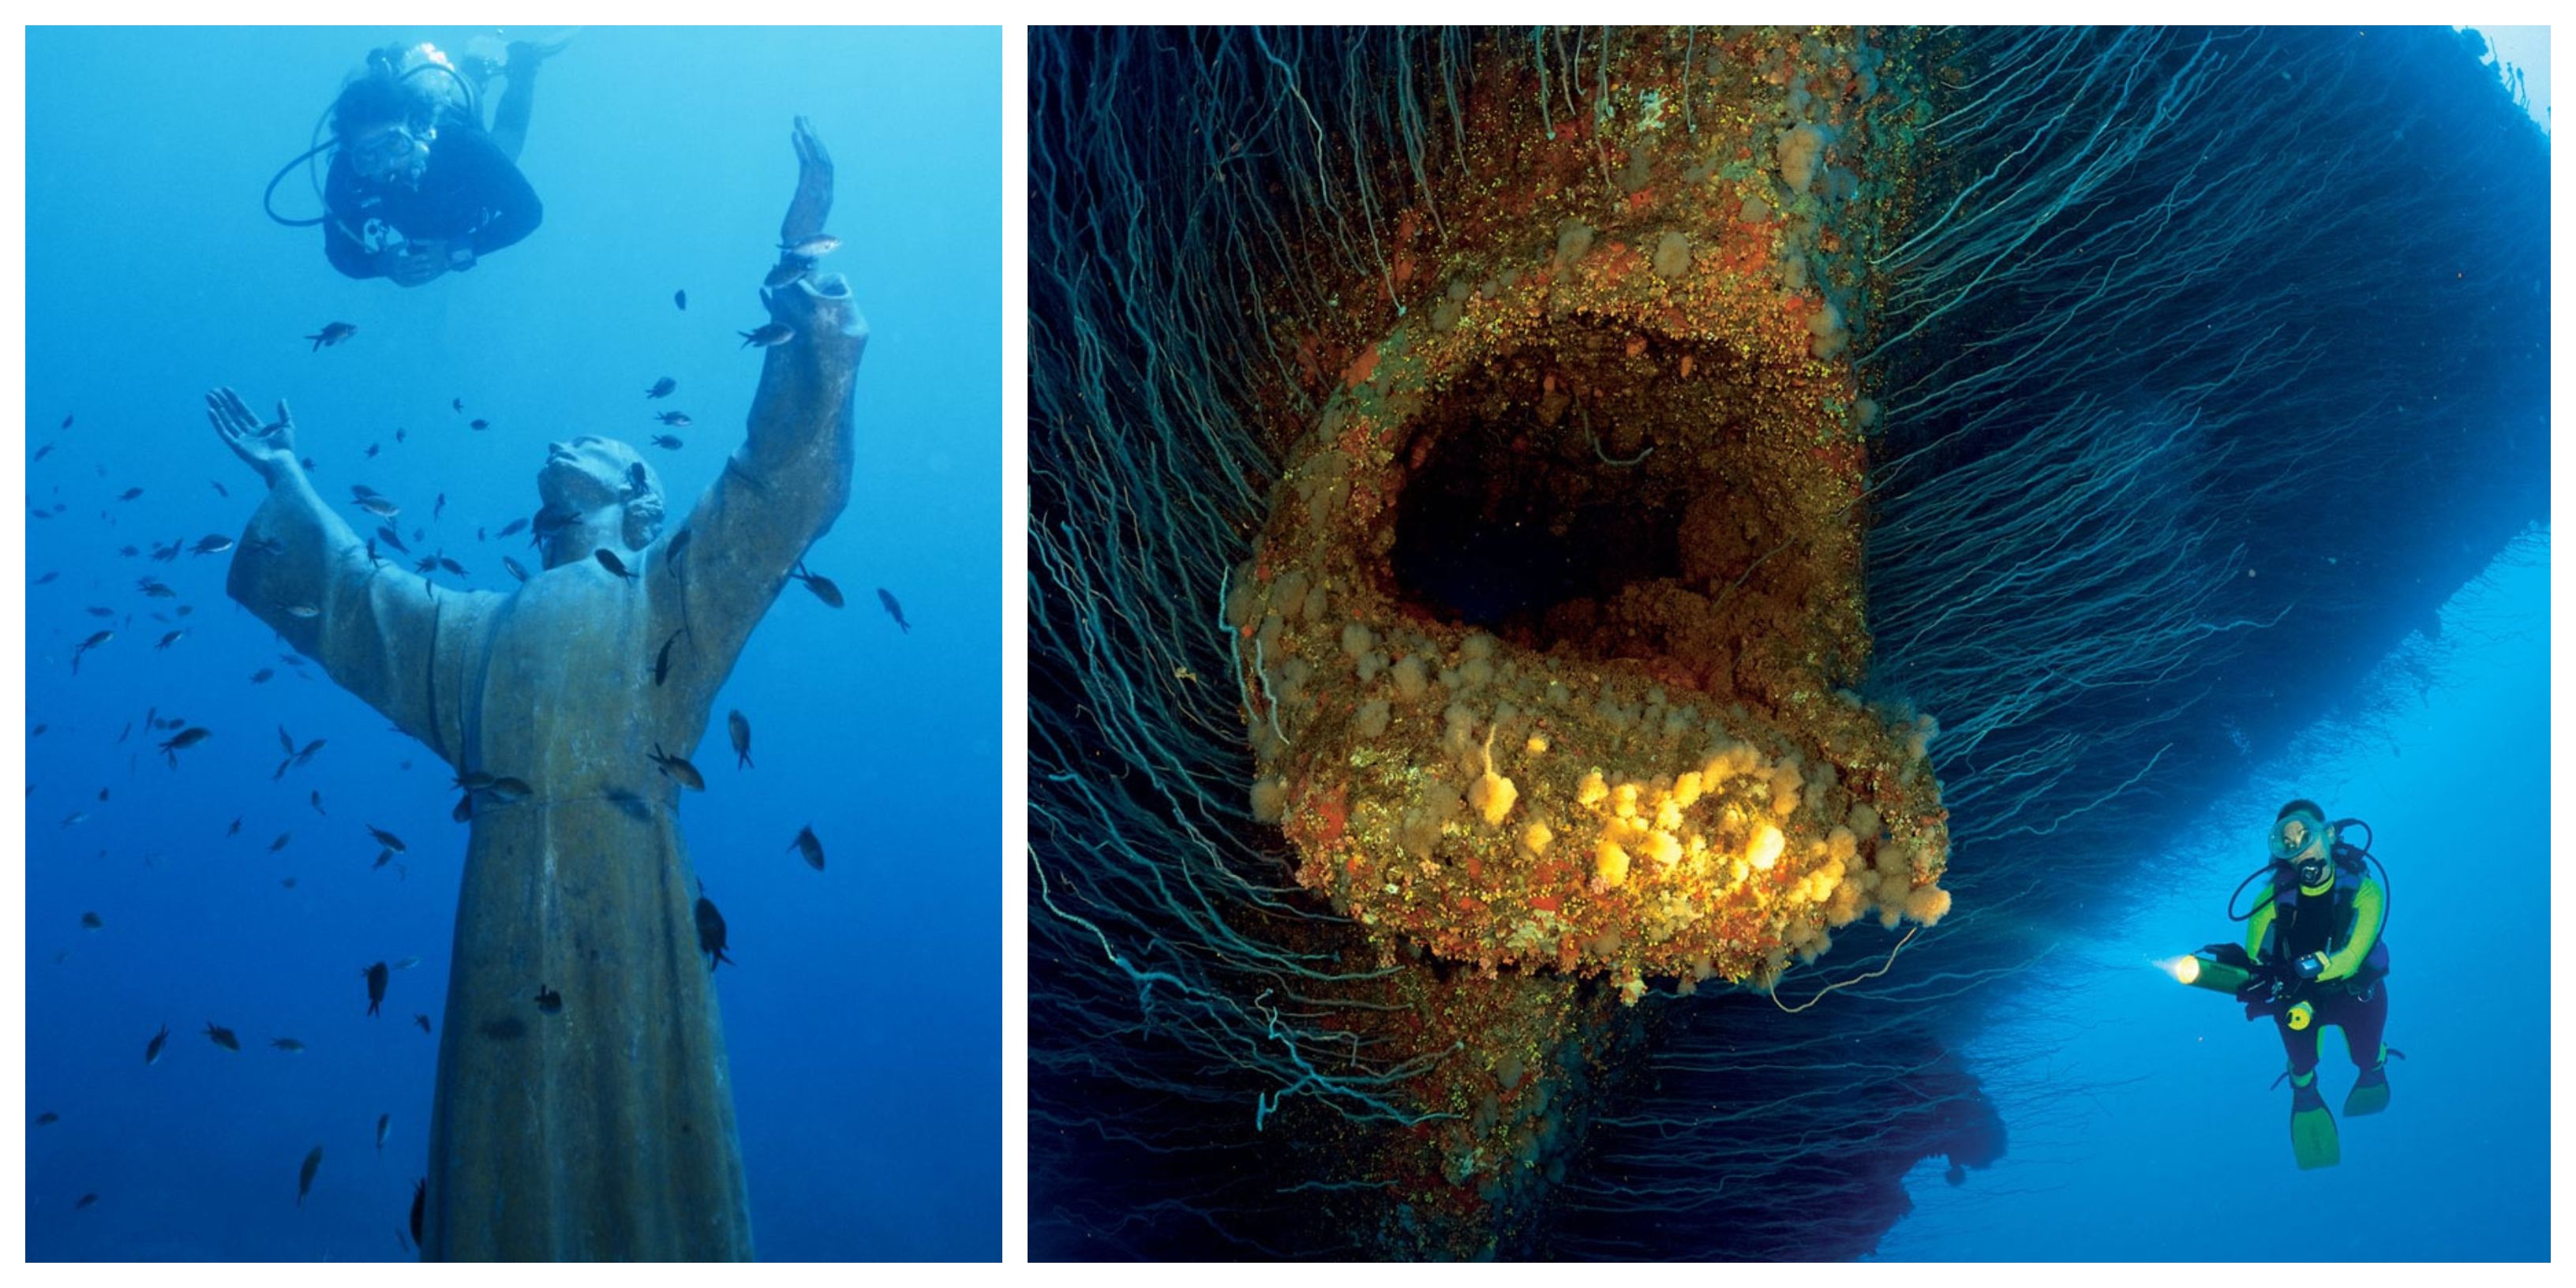 25 Pictures Of Mysterious Underwater Locations From The Deep Sea